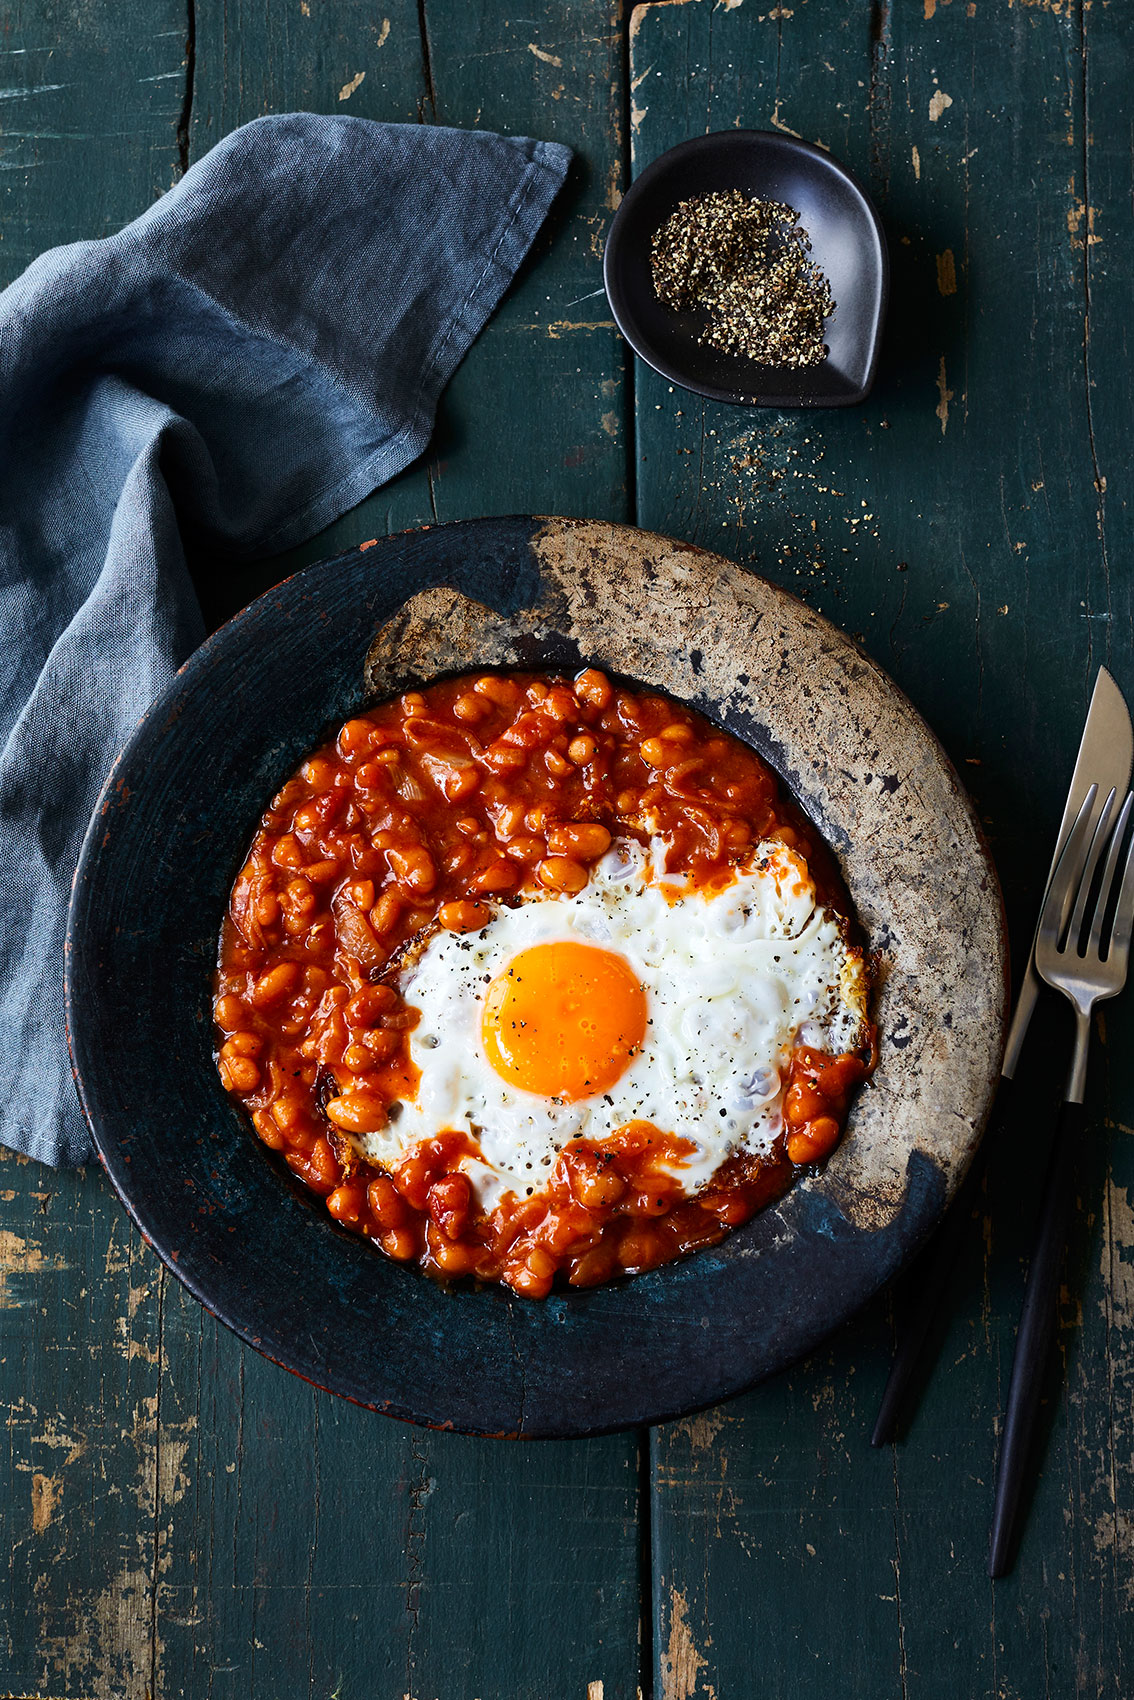 My Indian Kitchen • Baked Beans with Fried Egg & Black Pepper • Cookbook & Editorial Food Photography